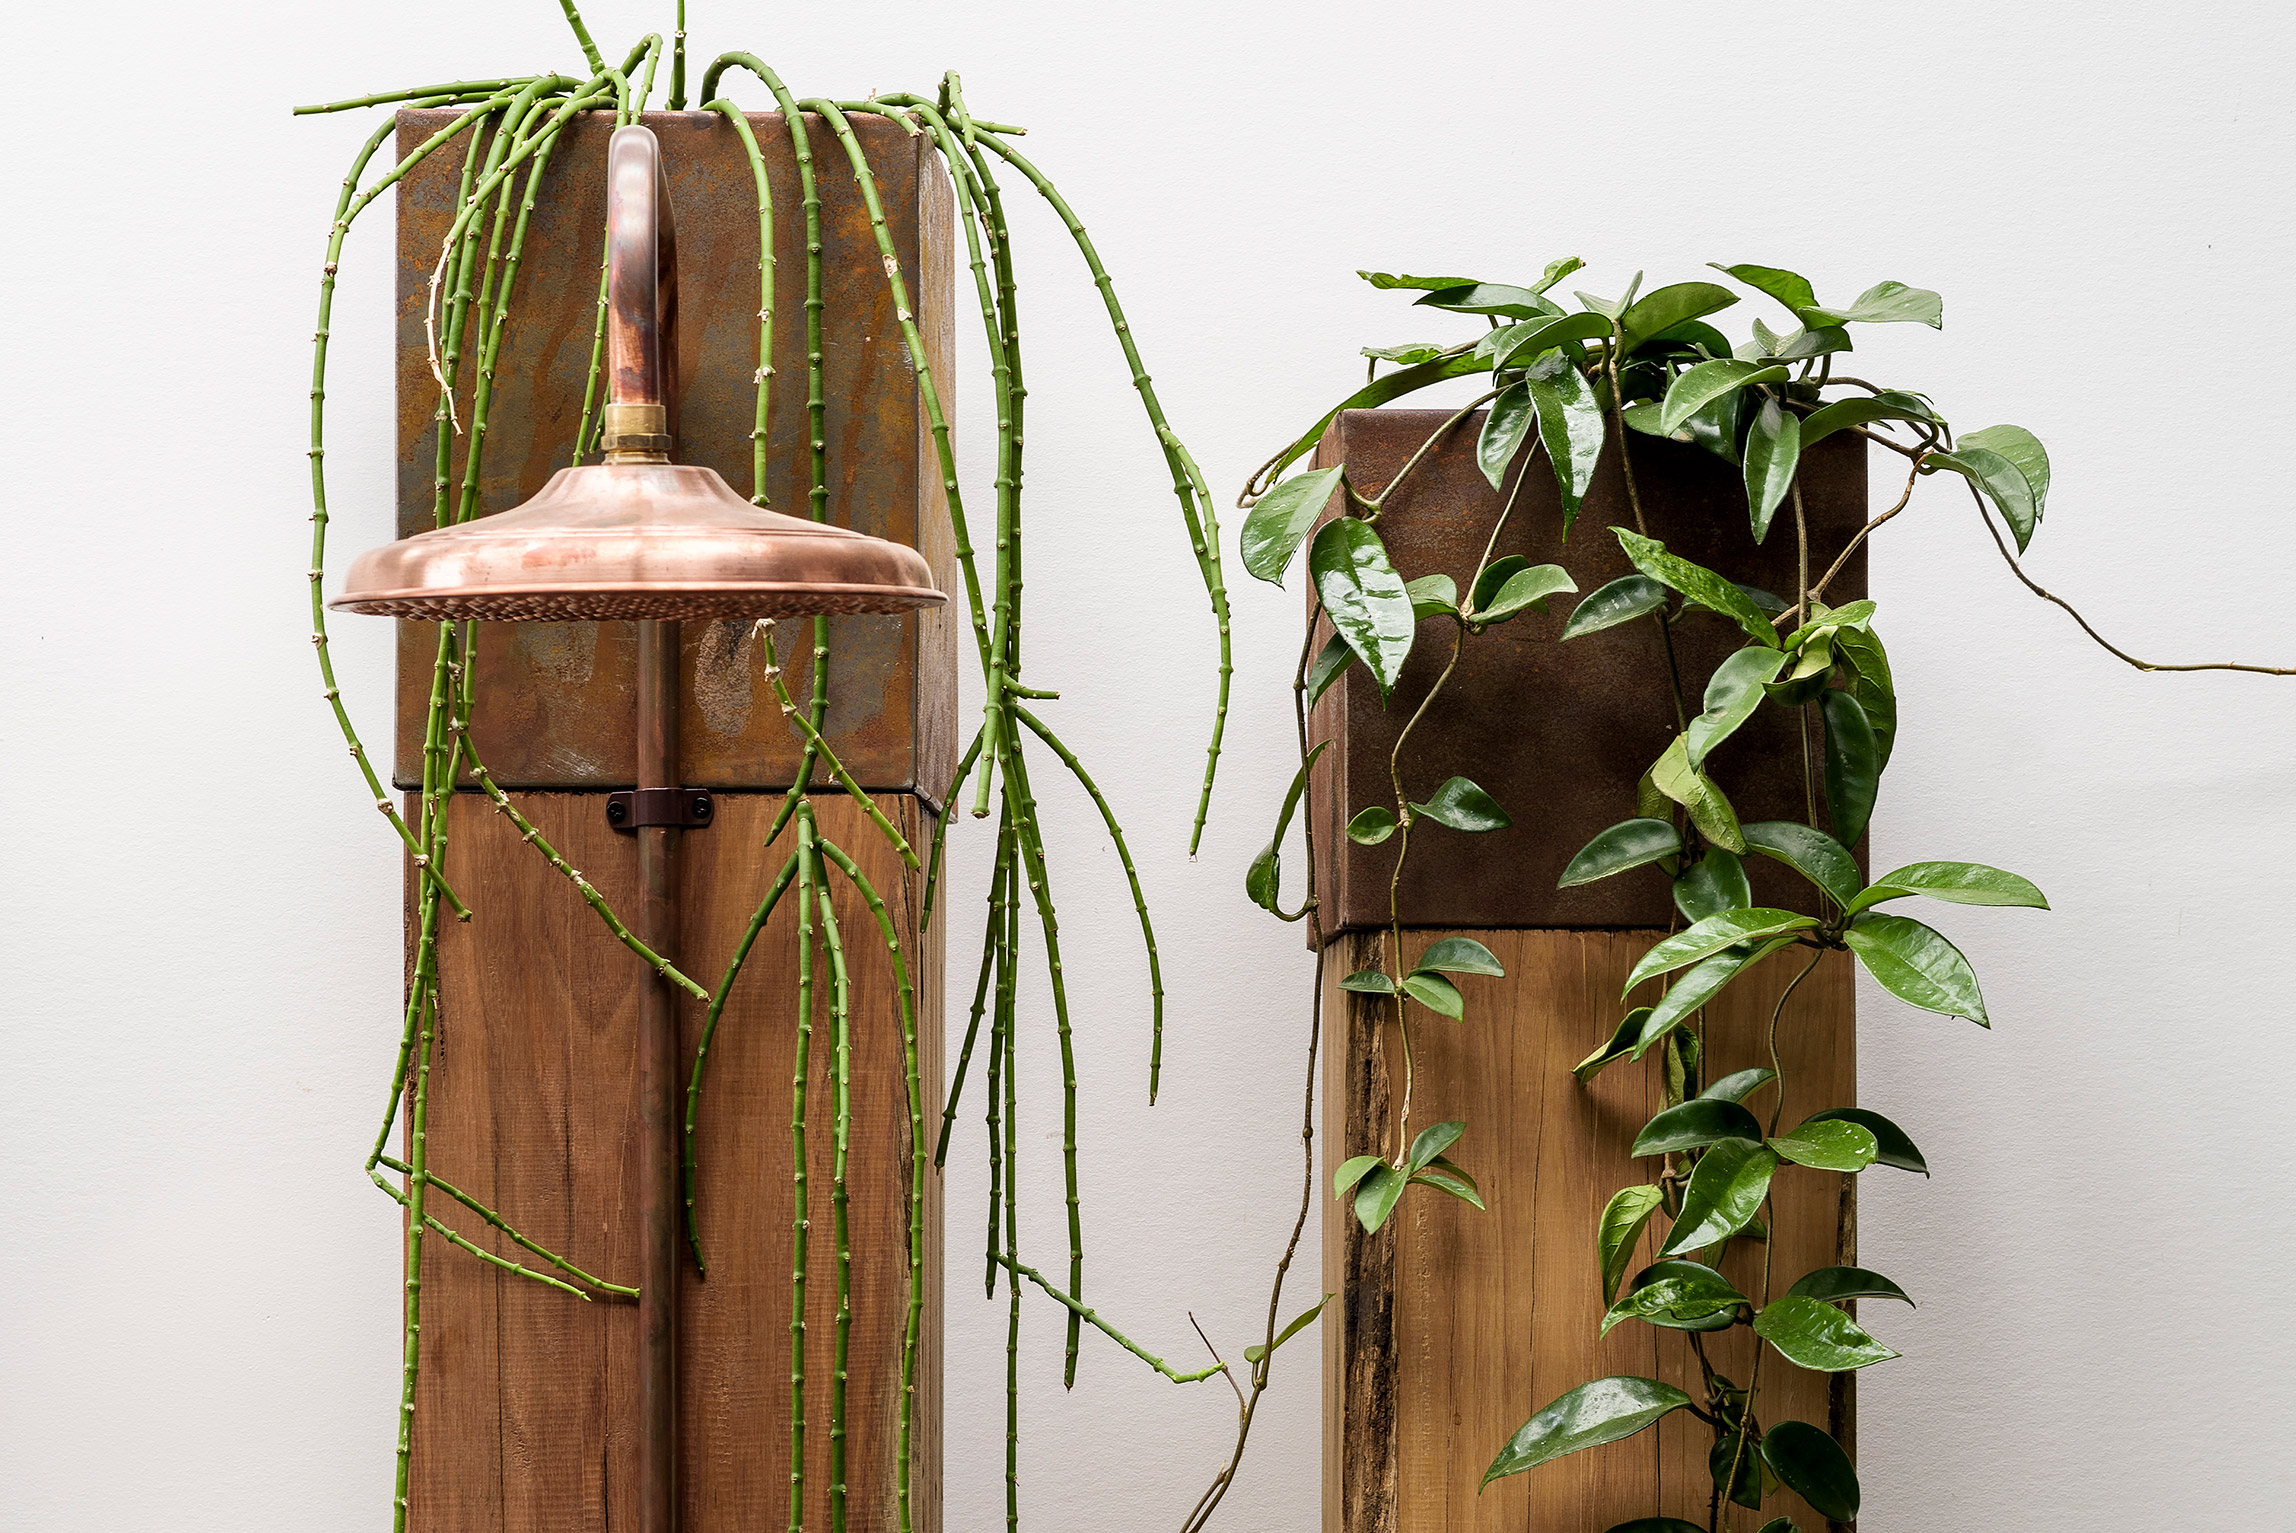 Bespoke recycled timber pillar outdoor showers with copper planter boxes